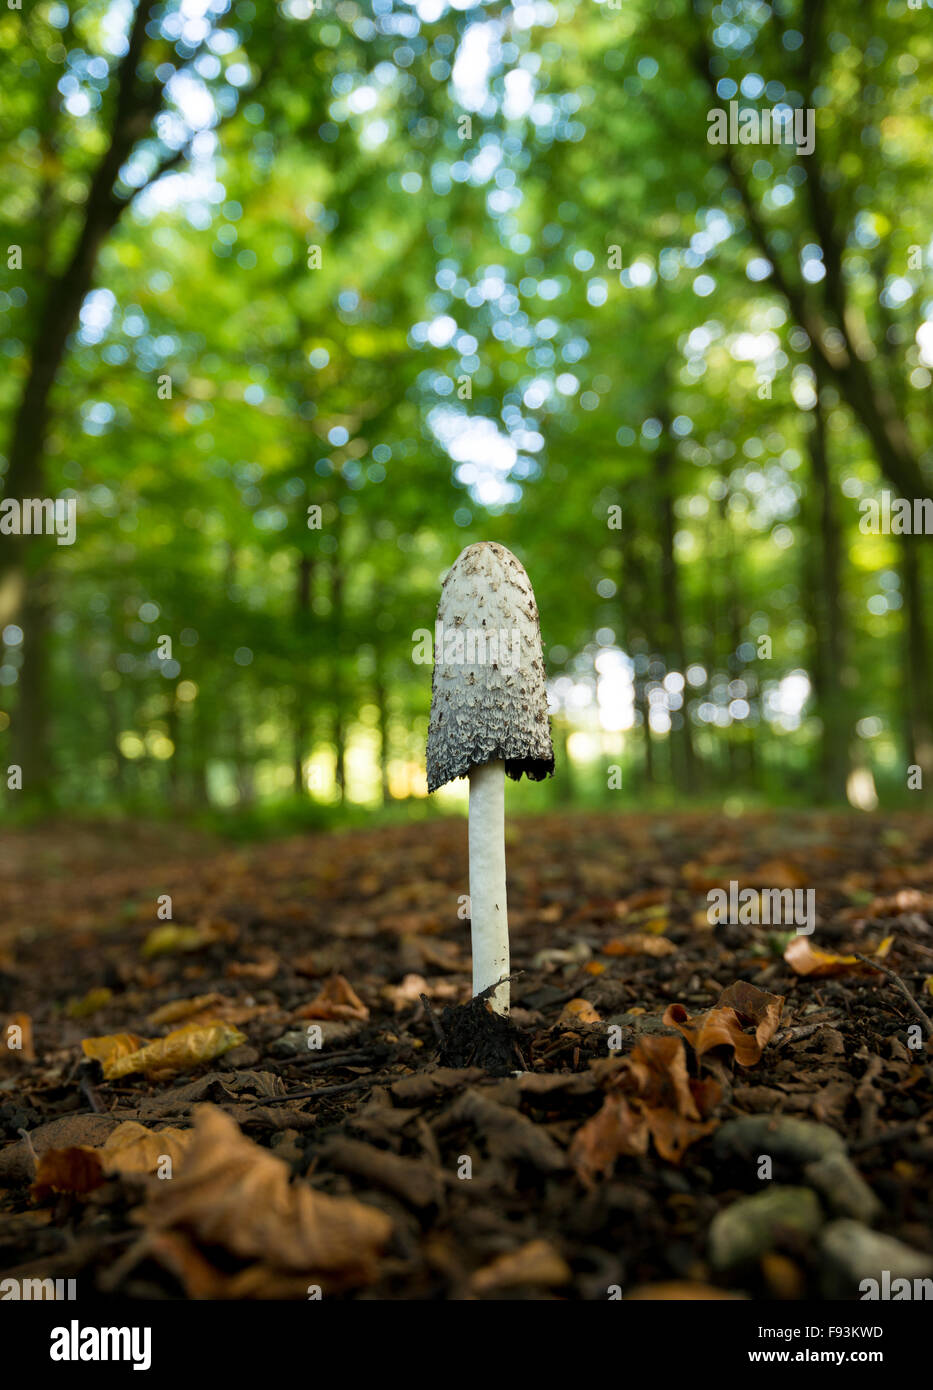 A large shaggy ink cap (Coprinus comatus) mushroom, found in Autumn at King's Wood, Kent. Stock Photo